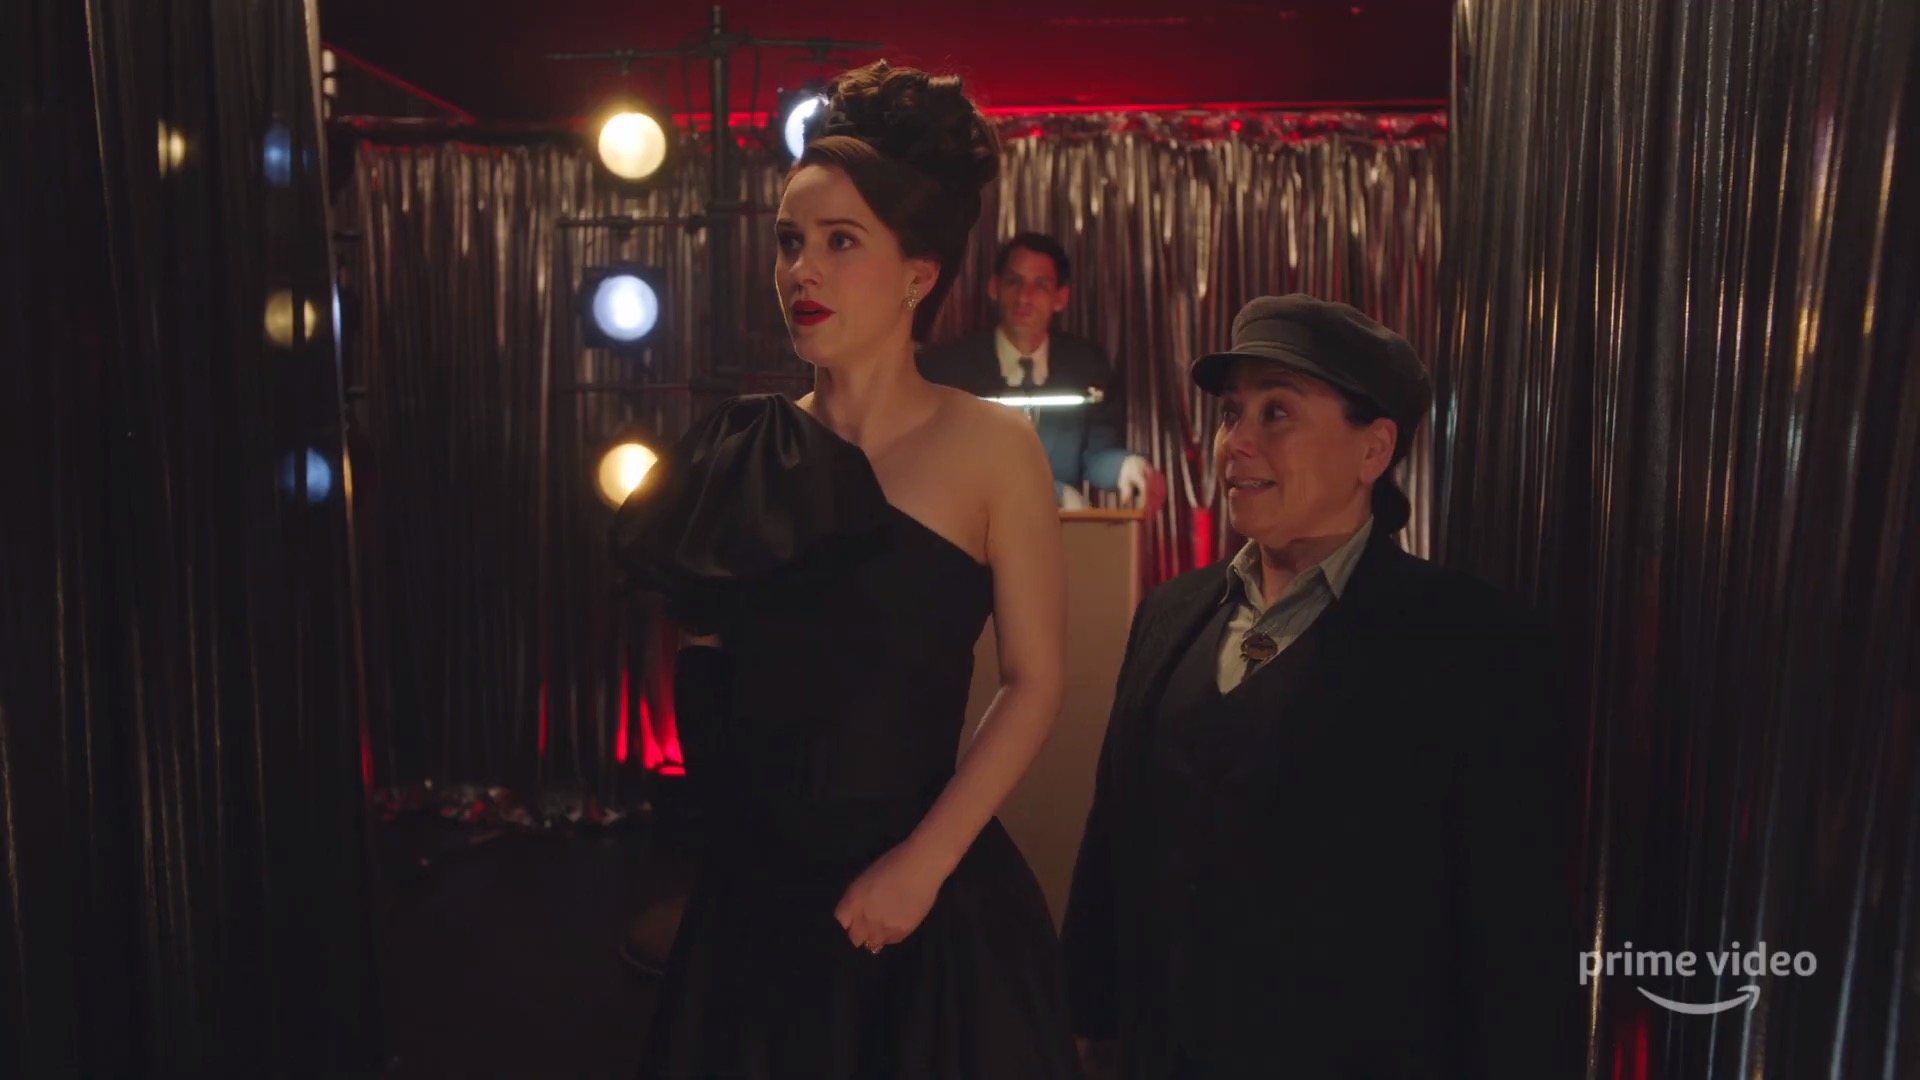 Marvelous Mrs Maisel Season 3 Trailer Its Off To Miami The Nerdy